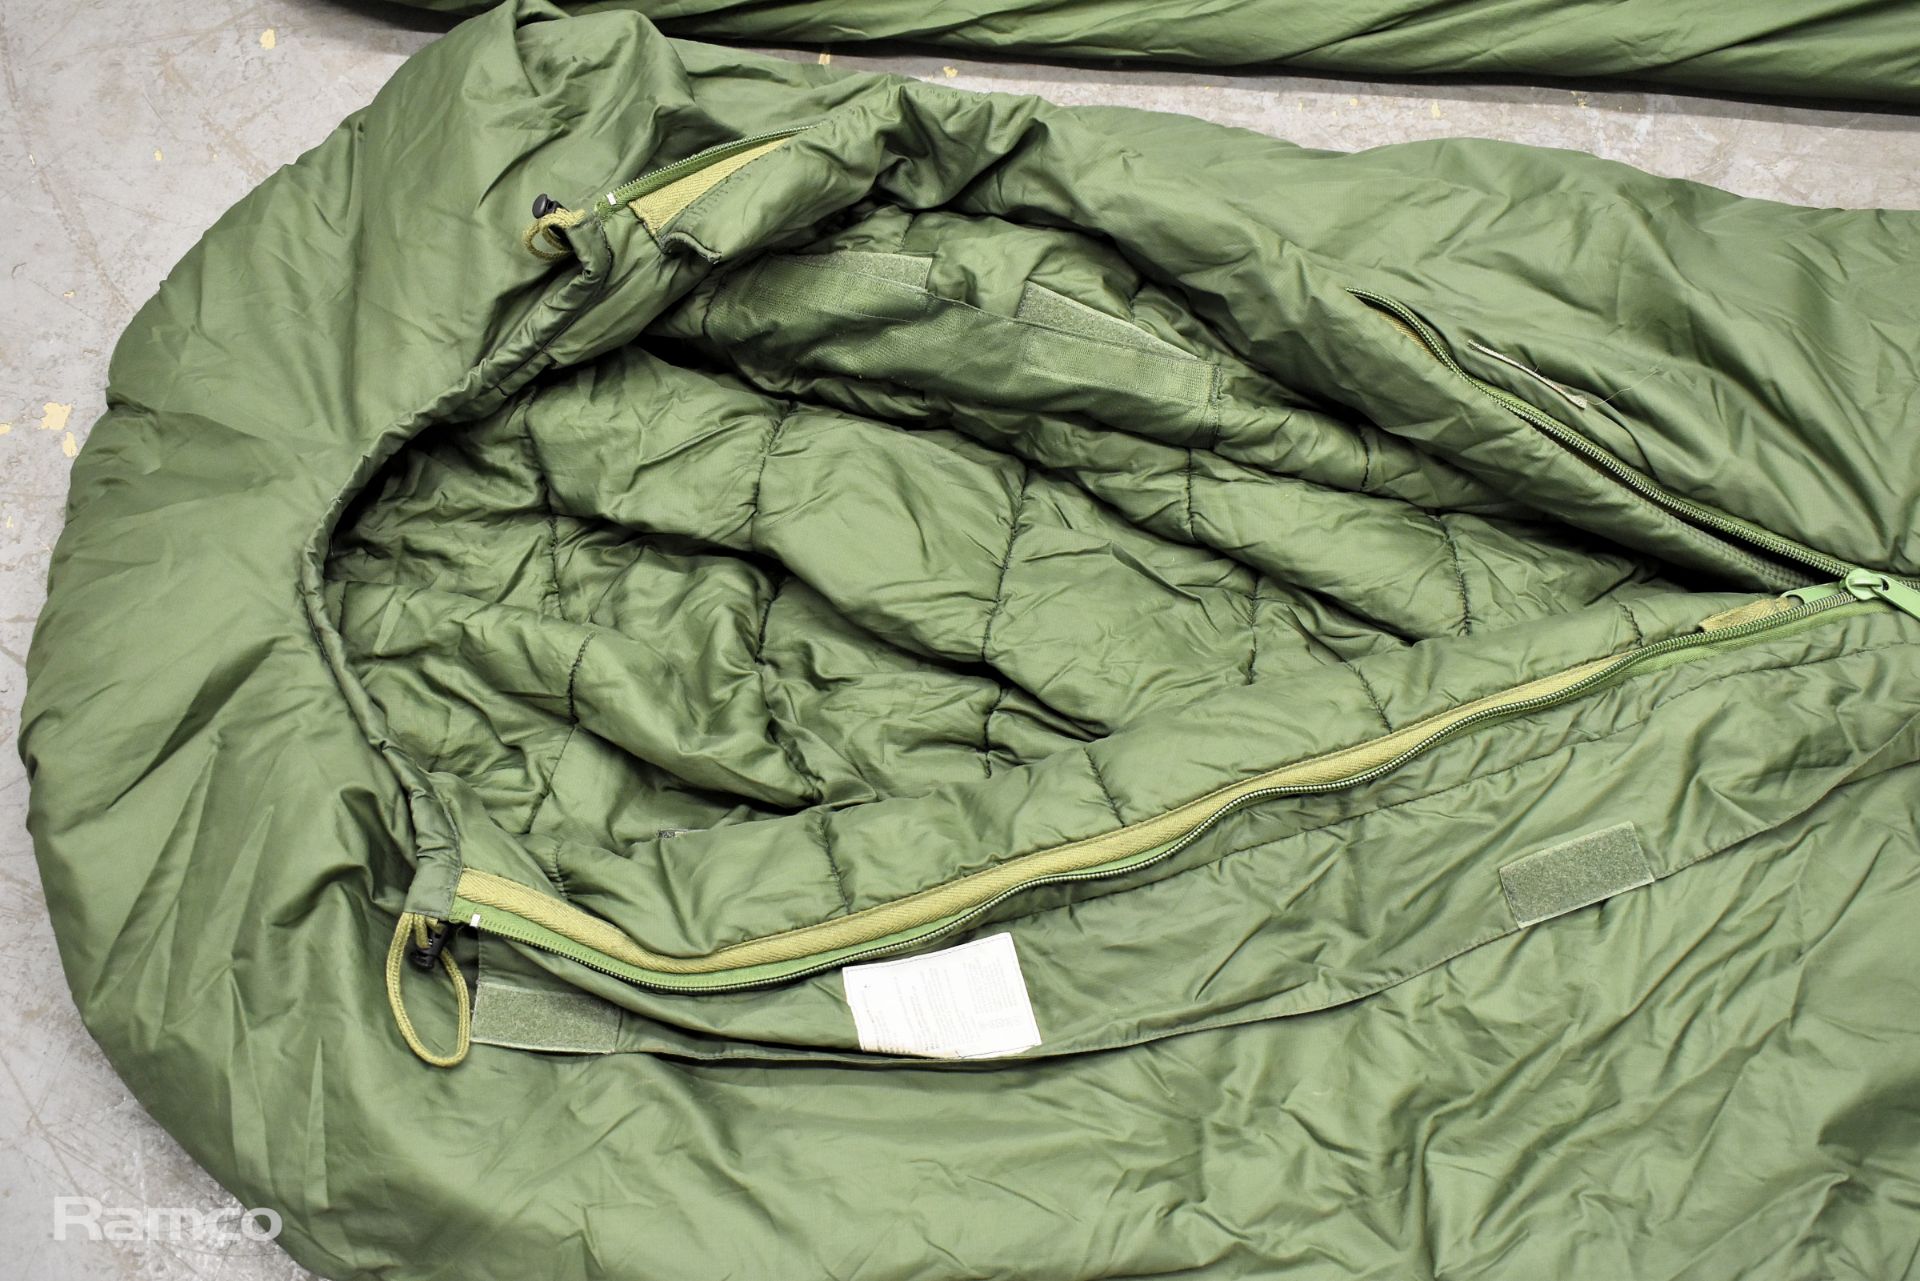 31x Sleeping bags - mixed grades and sizes - Image 7 of 8